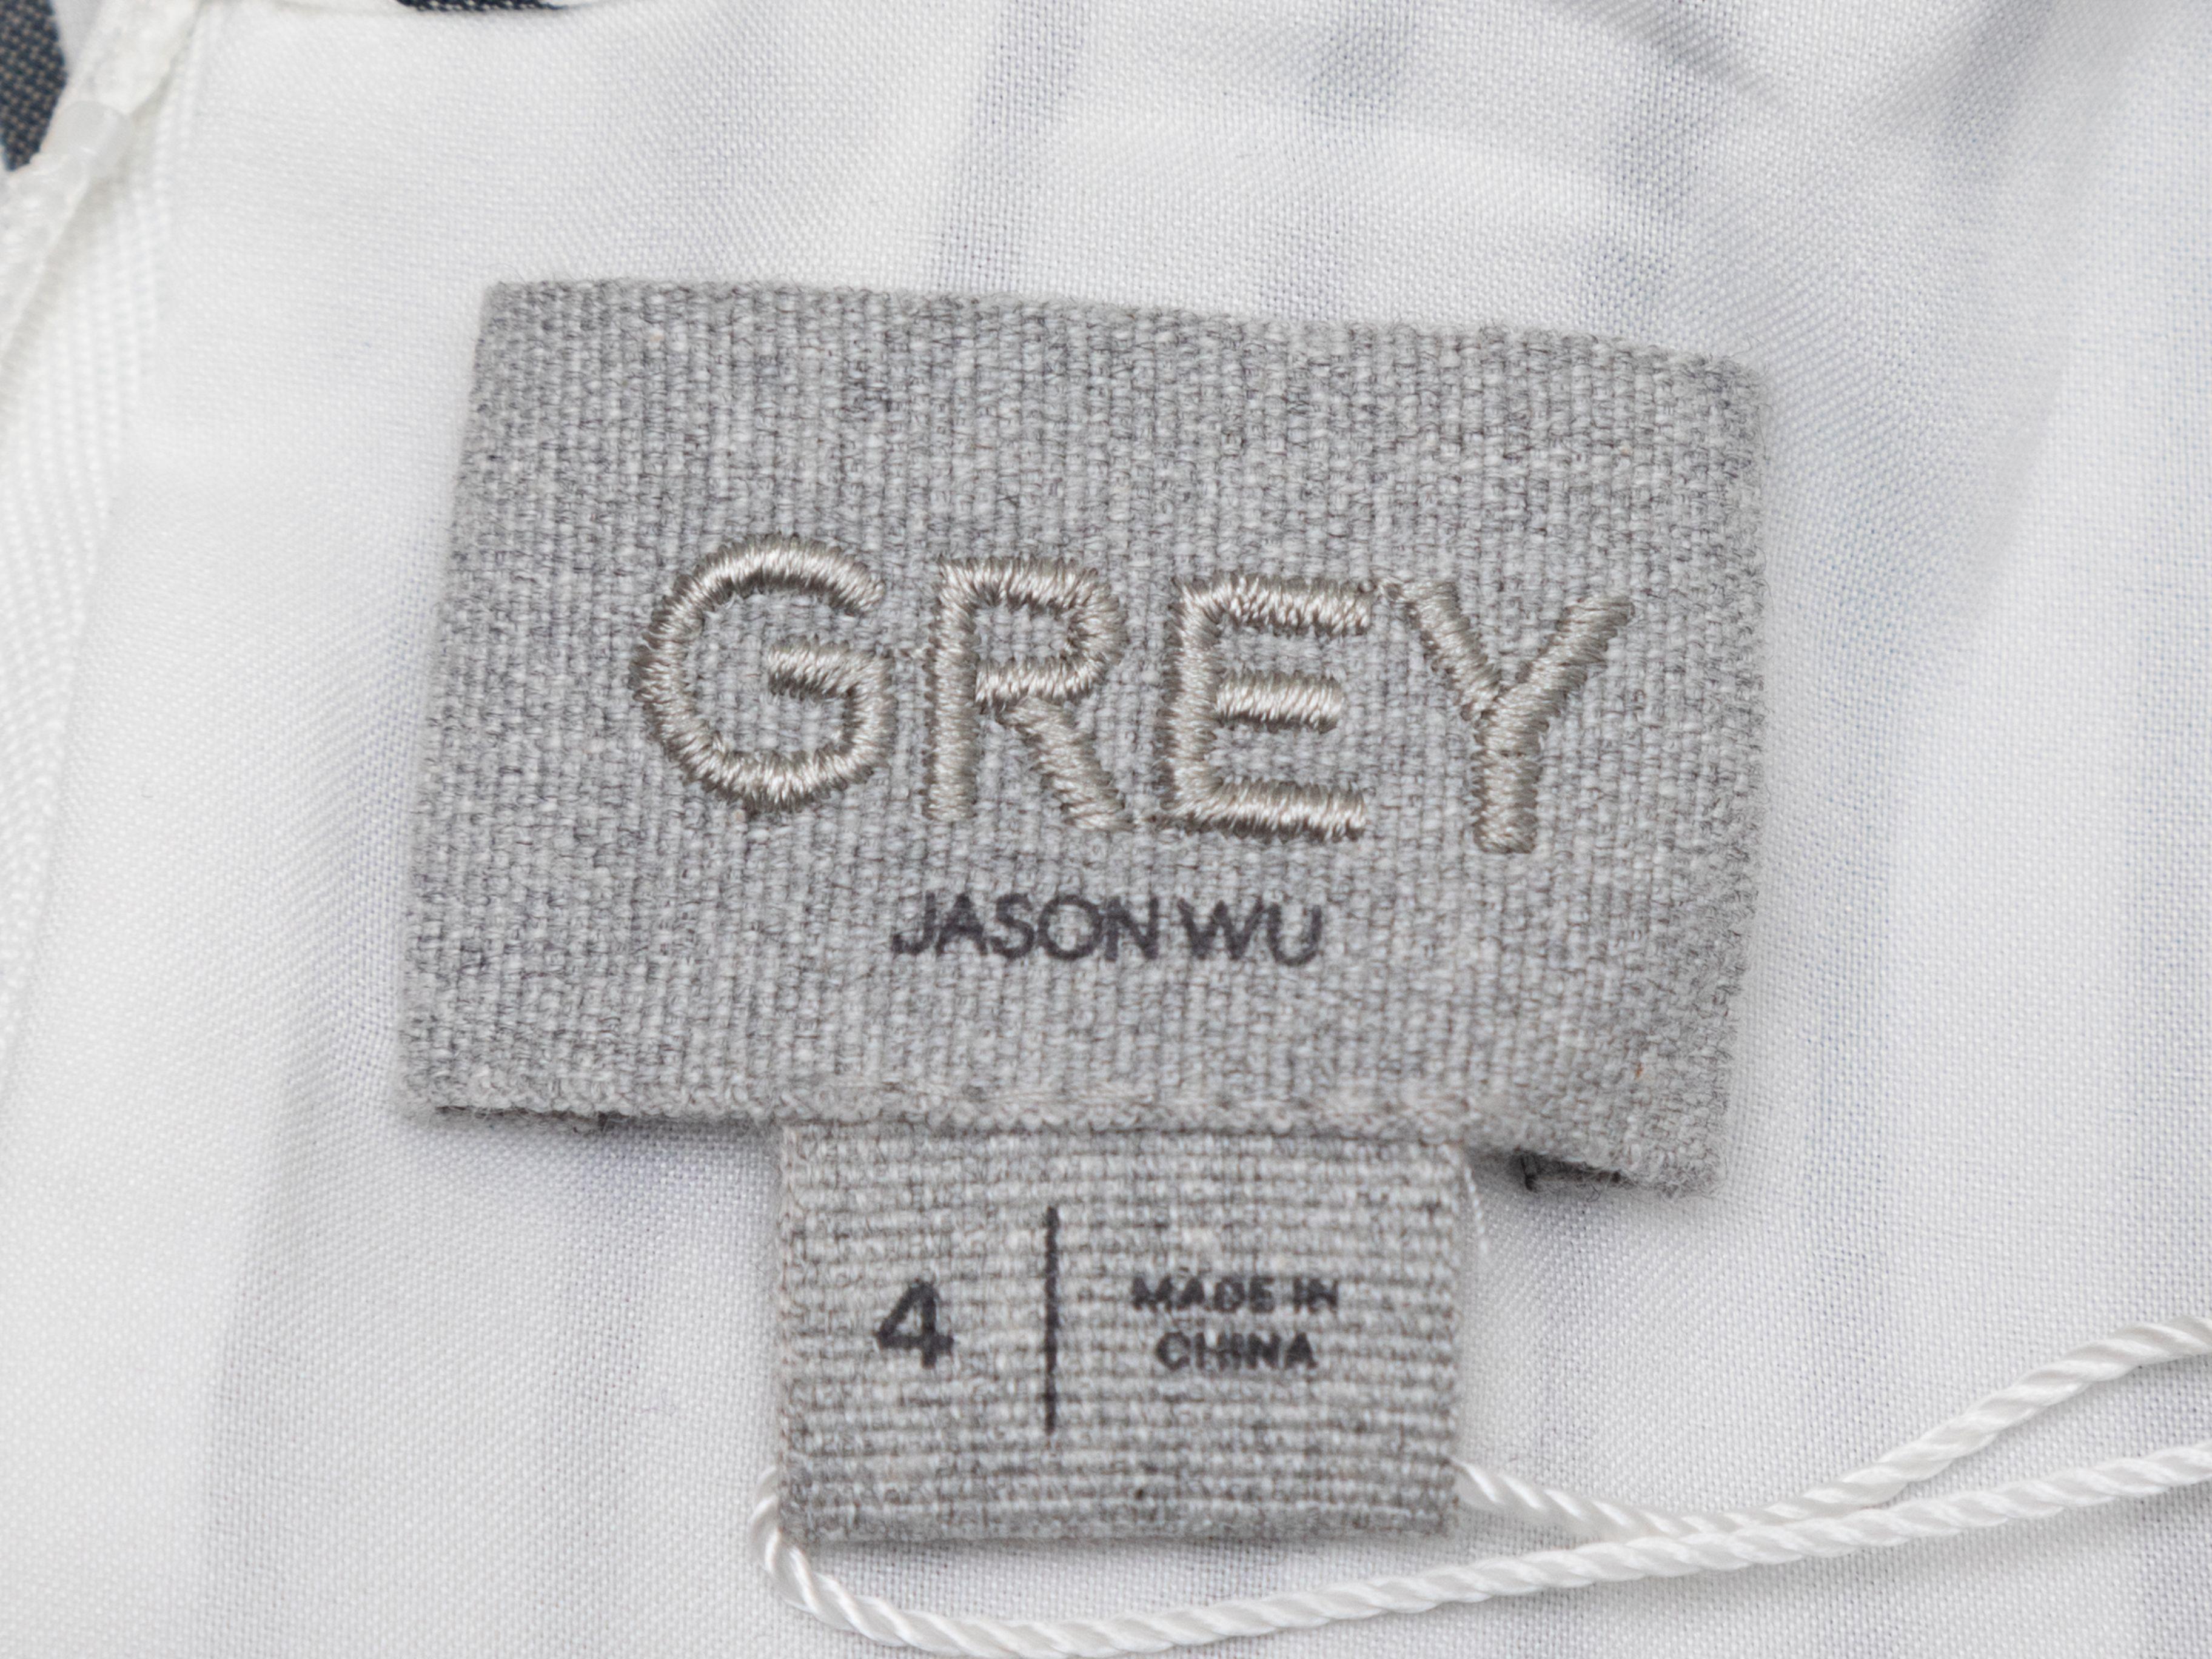 Product Details: Grey and white striped sleeveless romper by Grey by Jason Wu. Crew neckline. Dual hip pockets. Sash tie at back of waist. Zip closure at back. 35